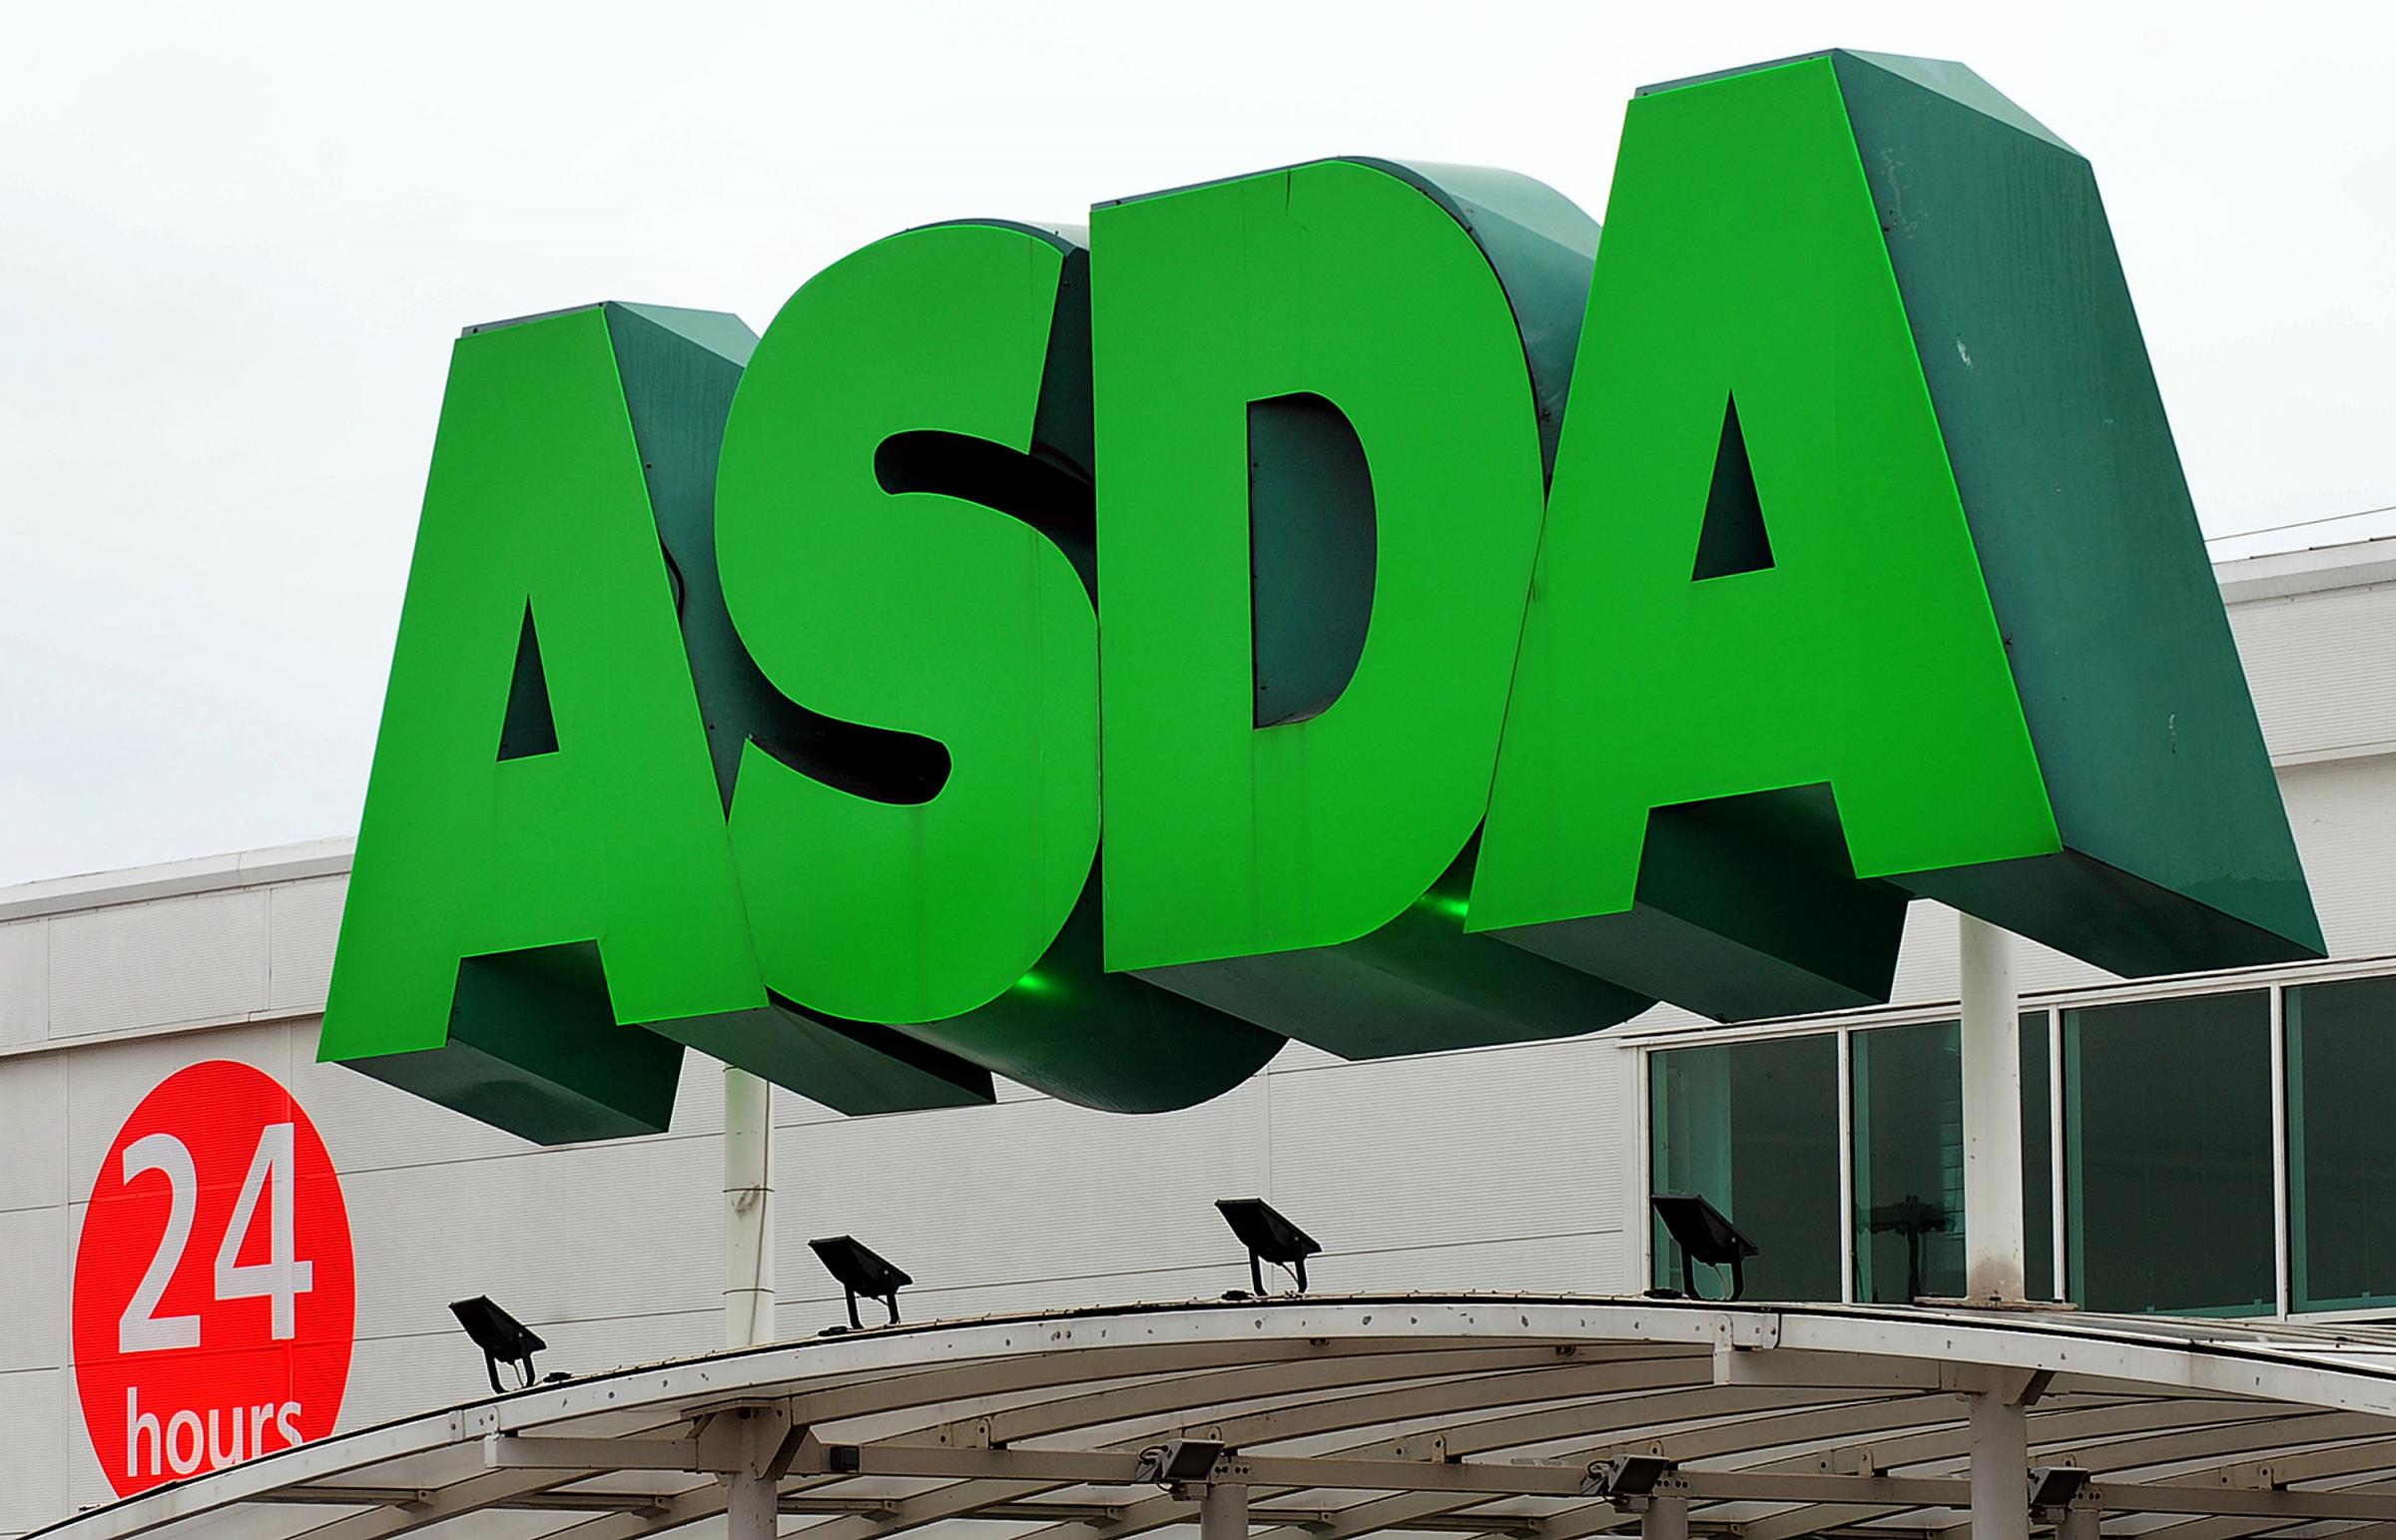 Asda announces new Asda Rewards loyalty scheme in 16 stores - see the full list